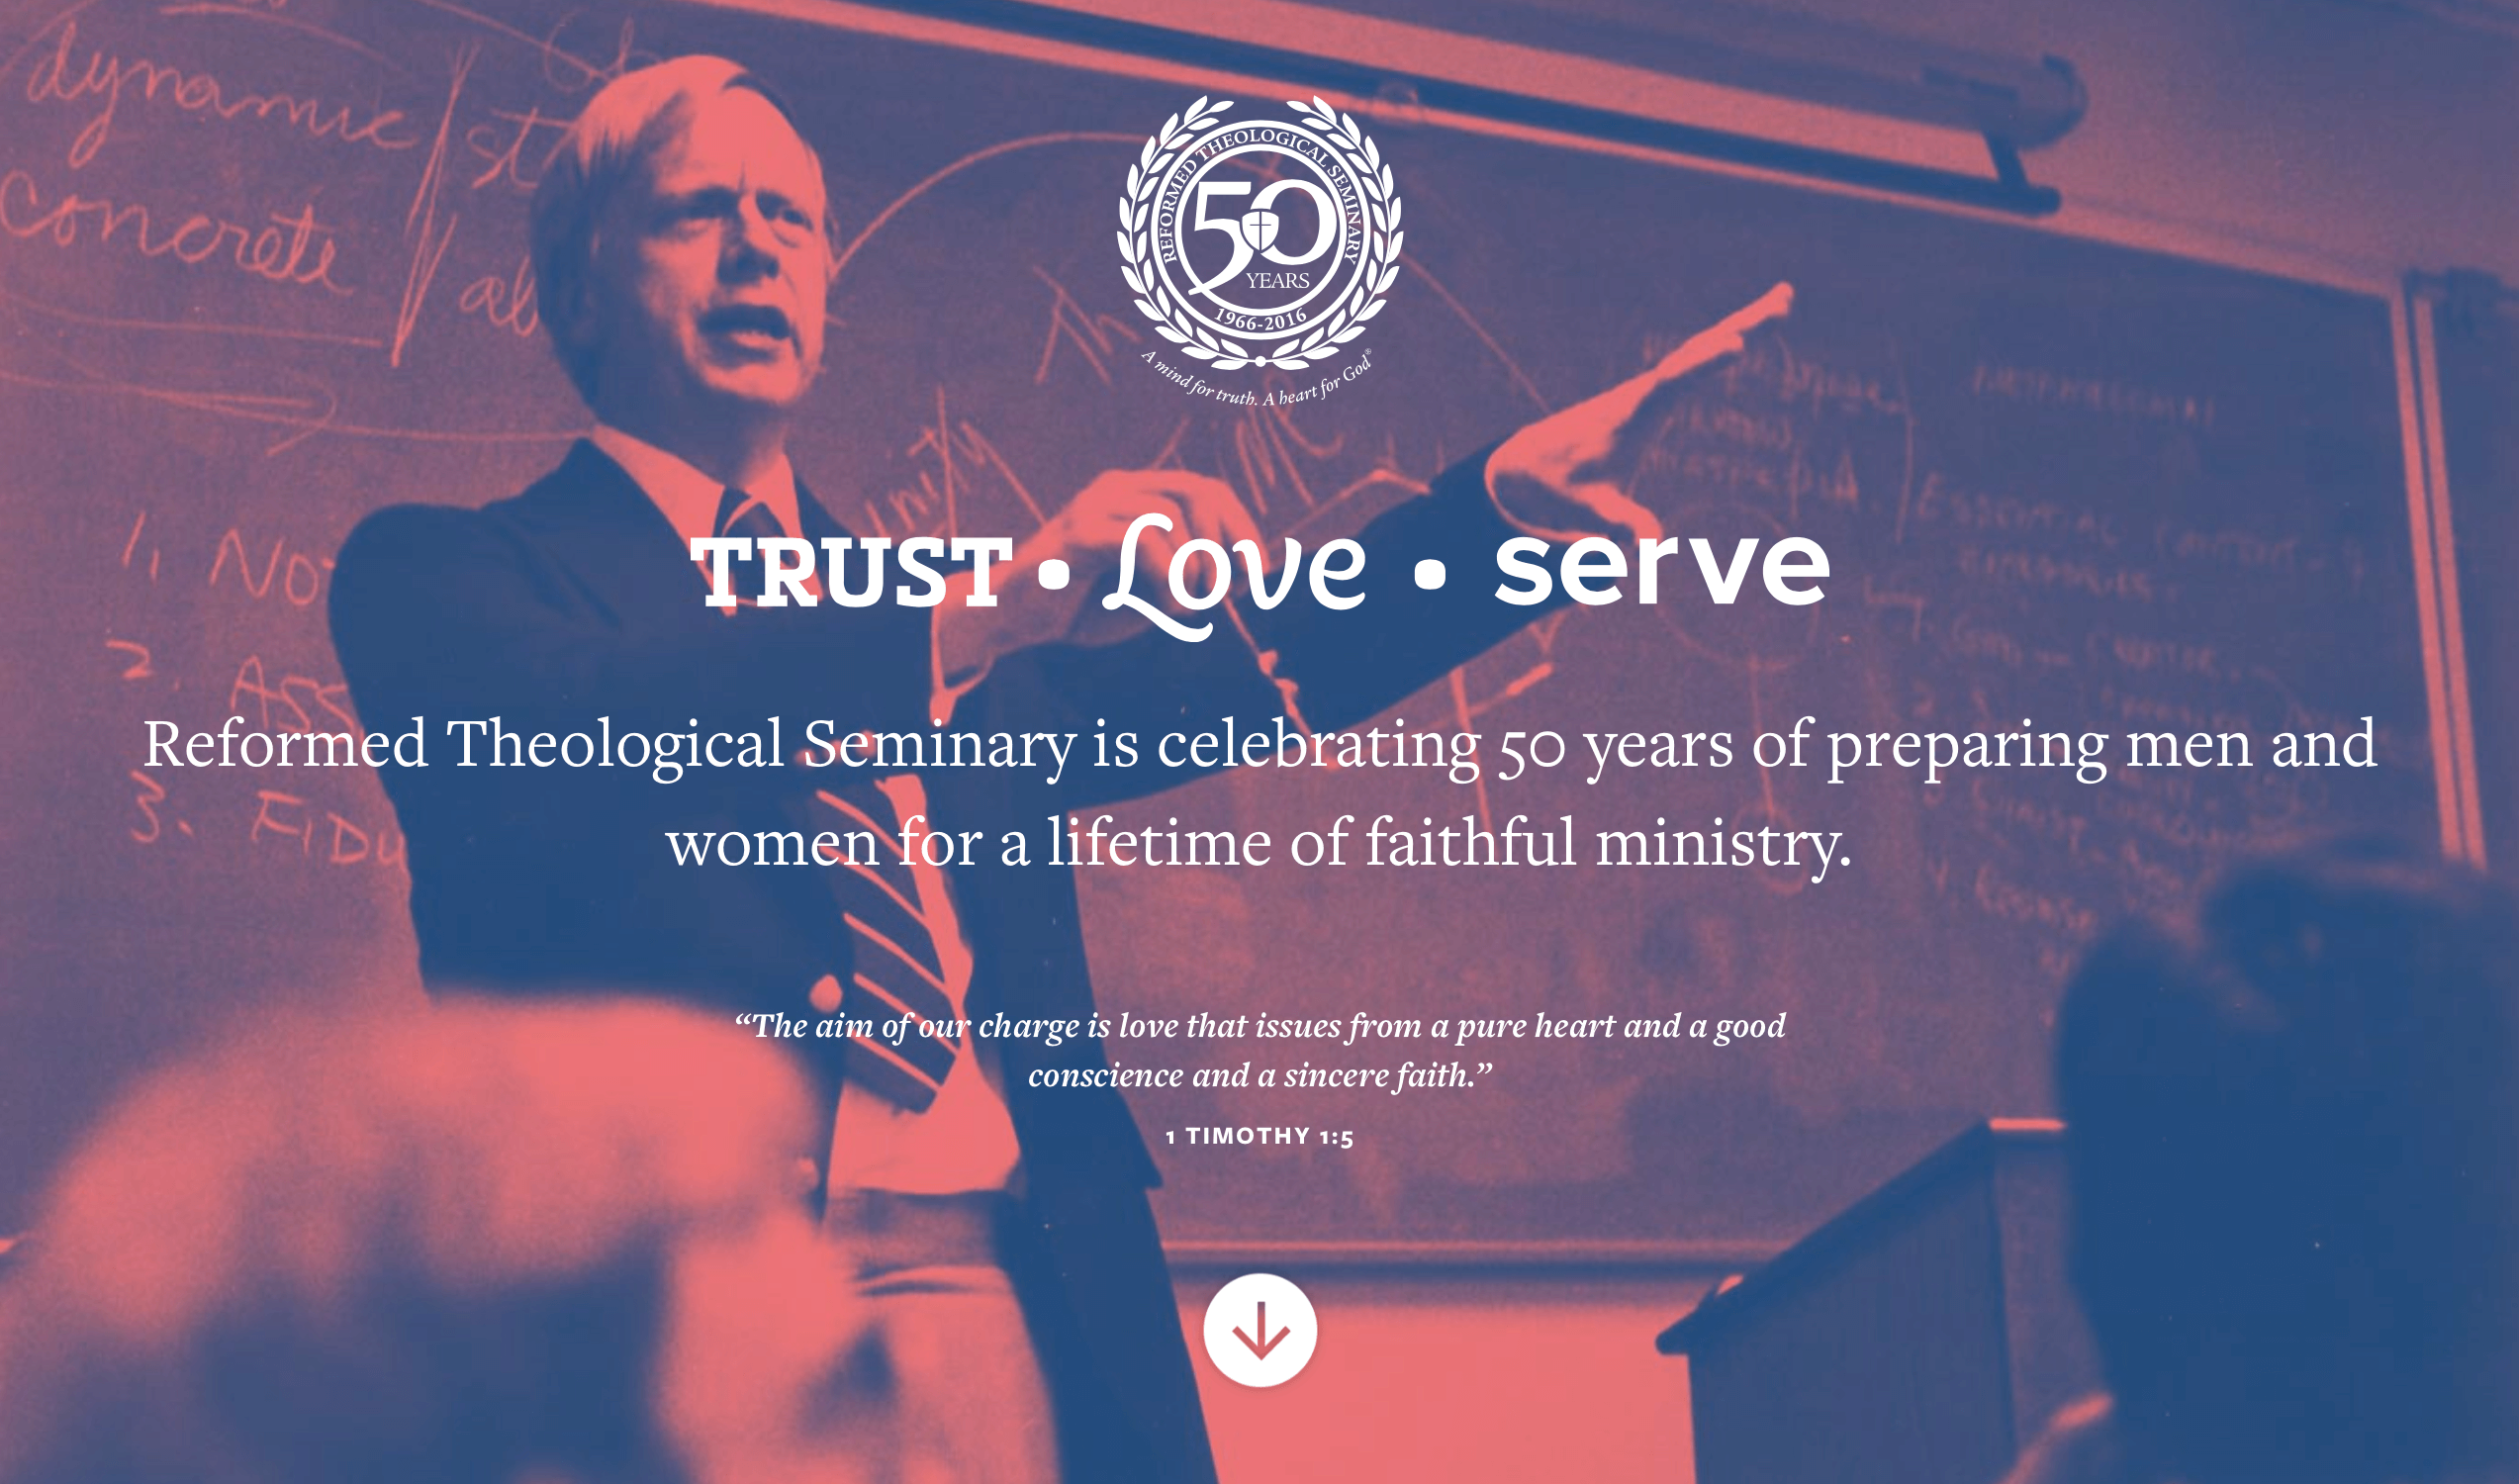 50th microsite intro screen - Trust, Love, Serve overlayed atop an image of a professor